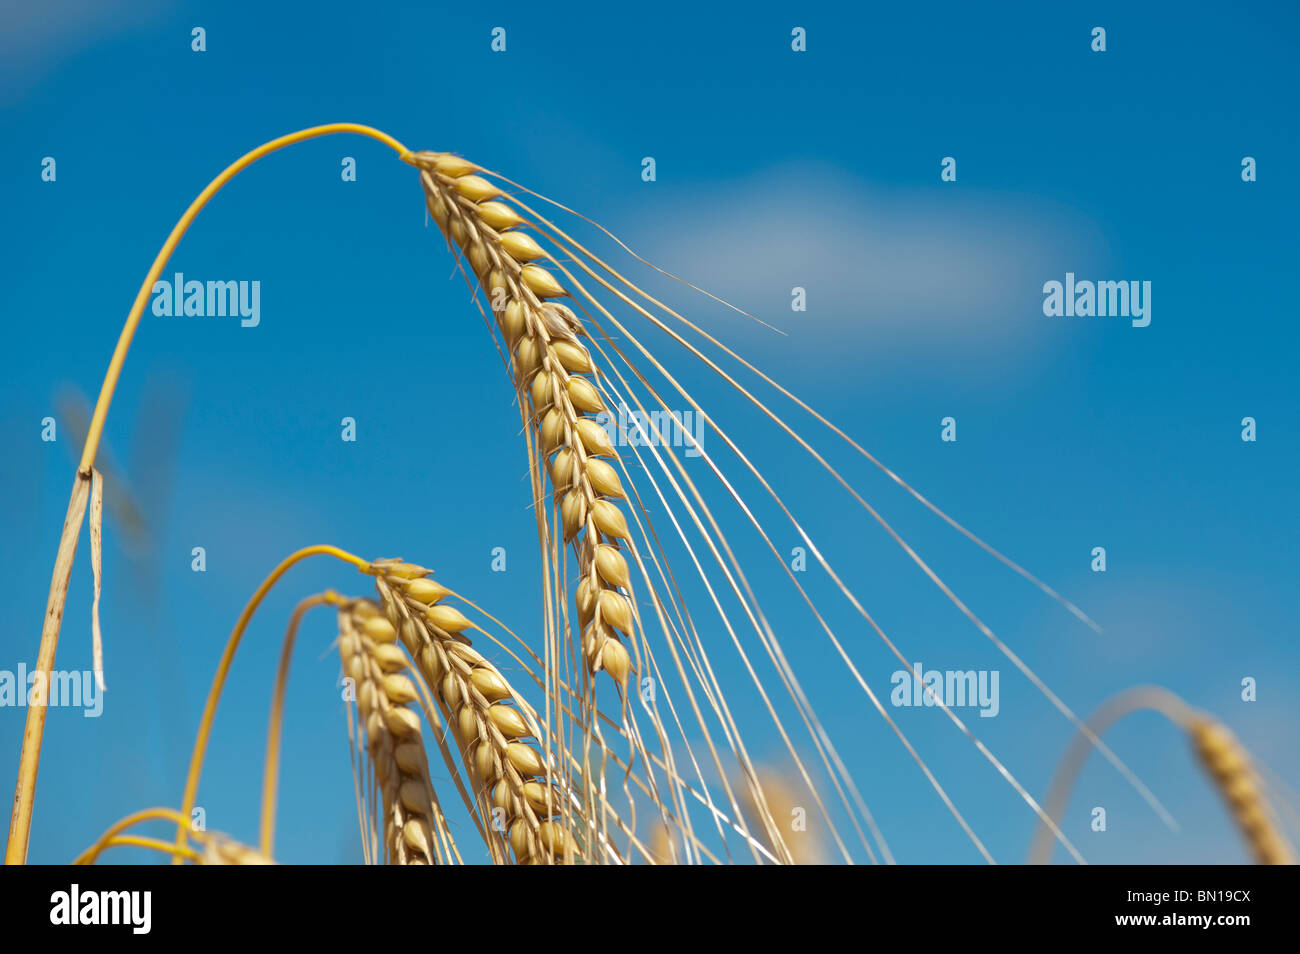 Barley crop ripening in a fields against a blue sky. Oxfordshire, England Stock Photo